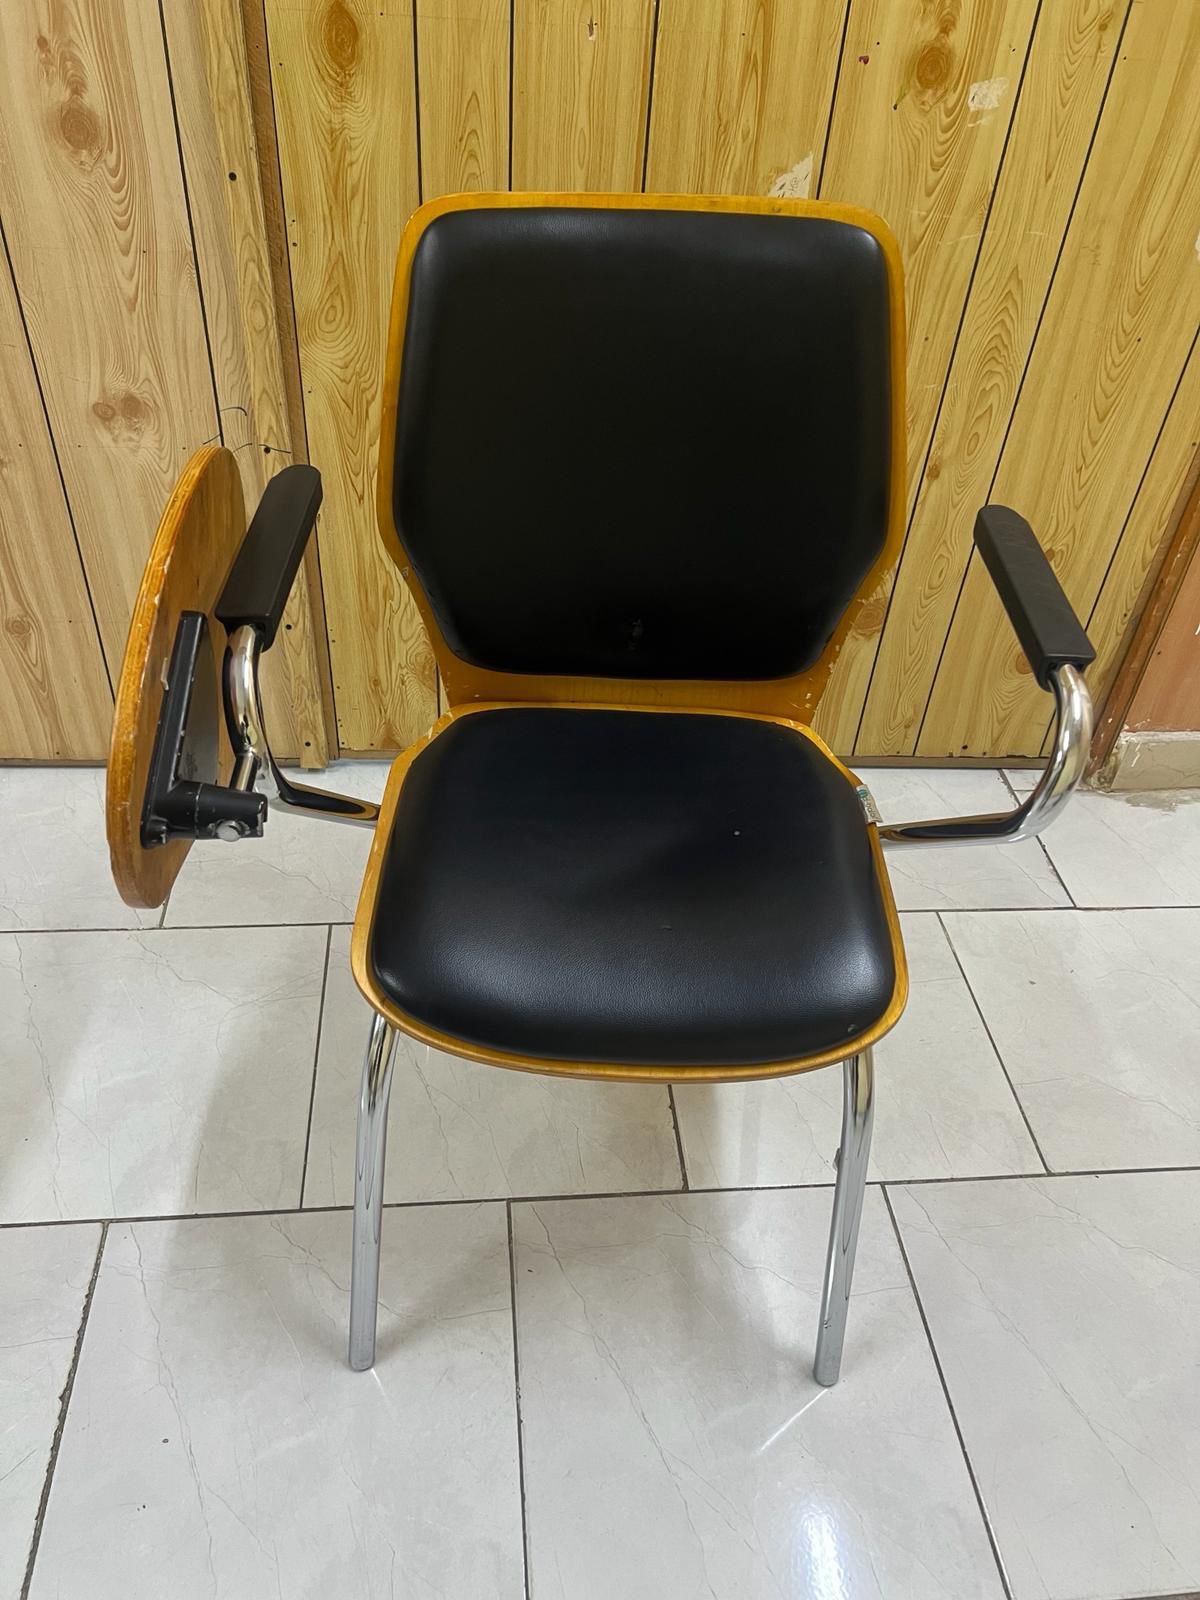 🔥 Urgent Sale for Used Chairs with writing pads